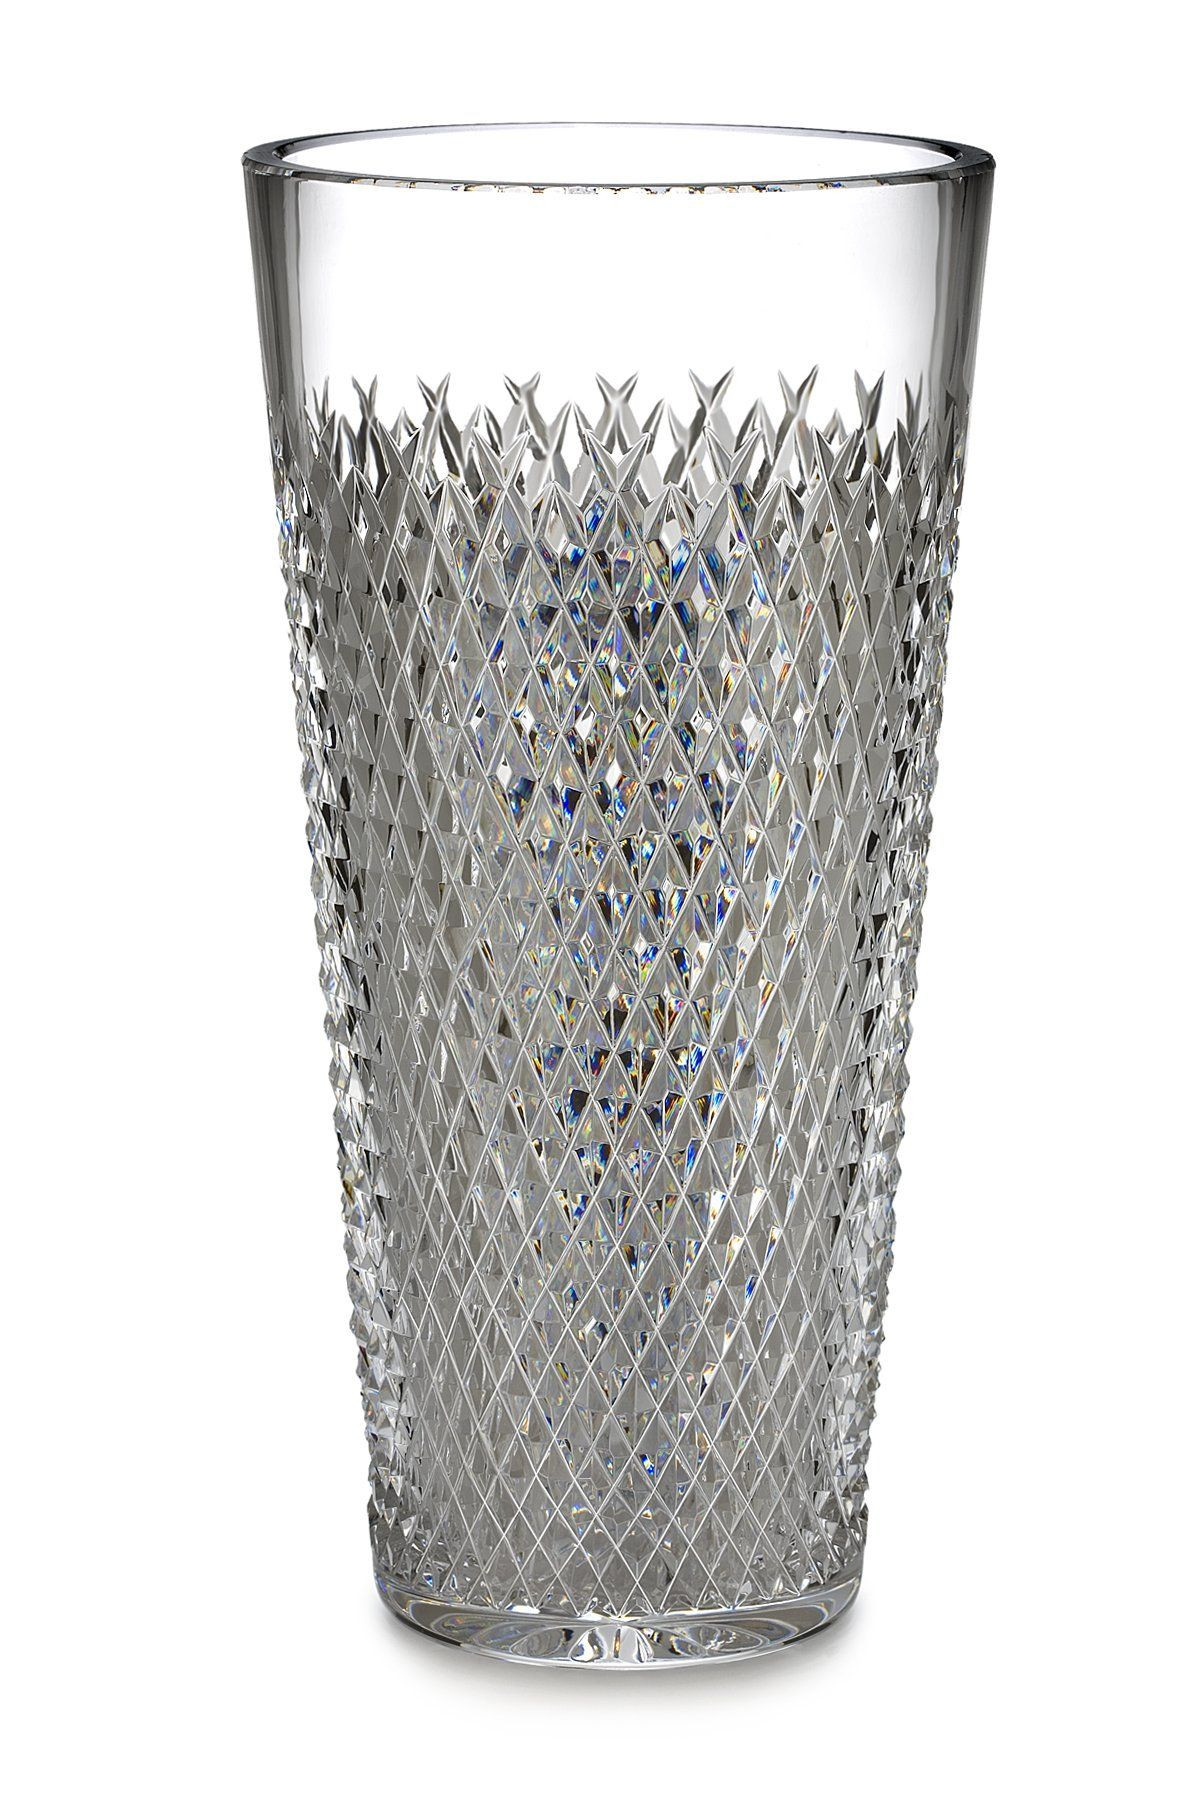 28 Unique Waterford Lismore Vase 10 Inch 2024 free download waterford lismore vase 10 inch of waterford alana 12 inch vase 12 inch vase crystal alana vases for waterford alana 12 inch vase 12 inch vase crystal alana